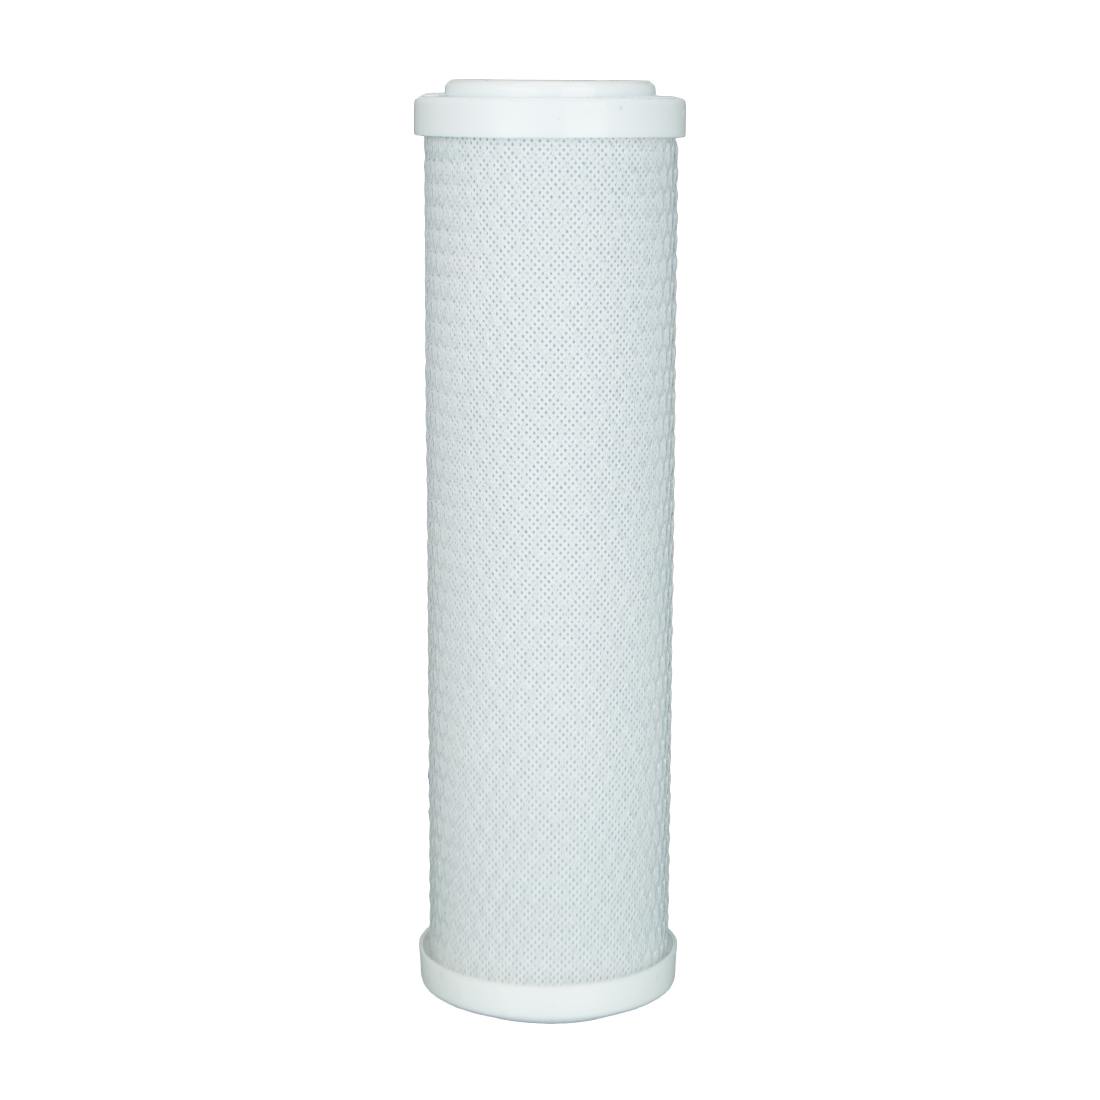 XERO Pure Carbon Filter Front View